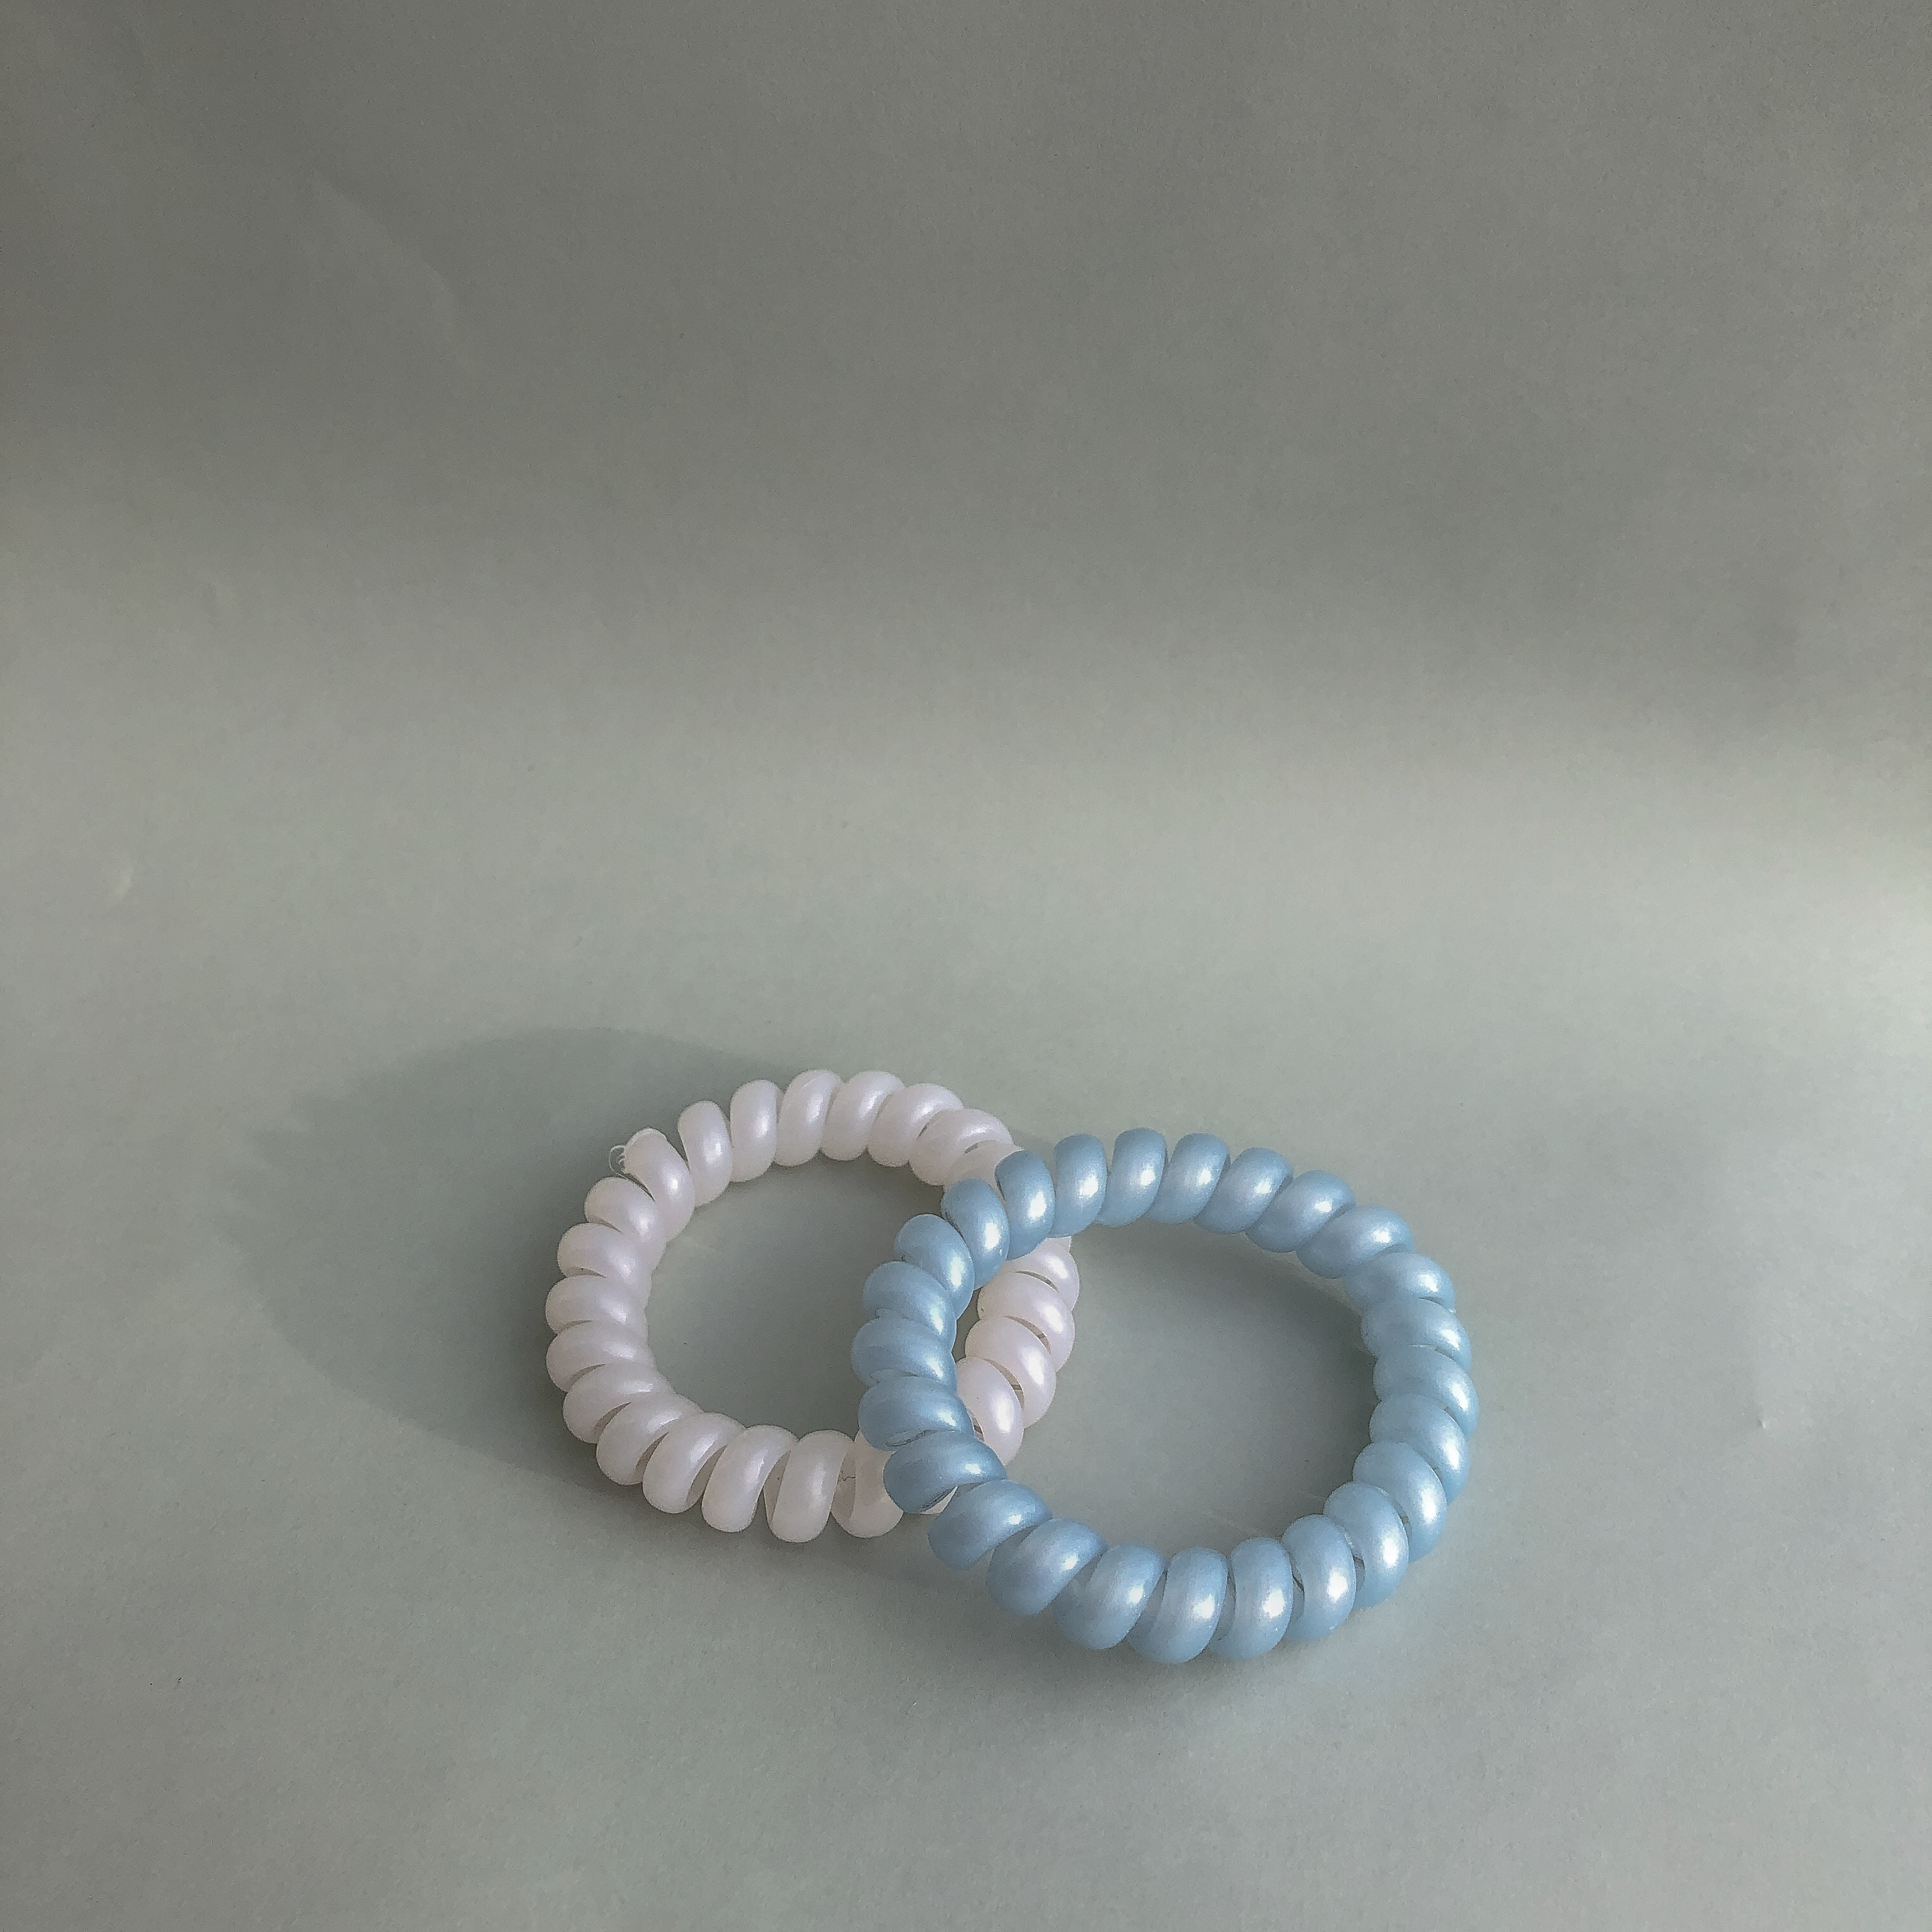 Pearly Phonecord Hairties by Veronique